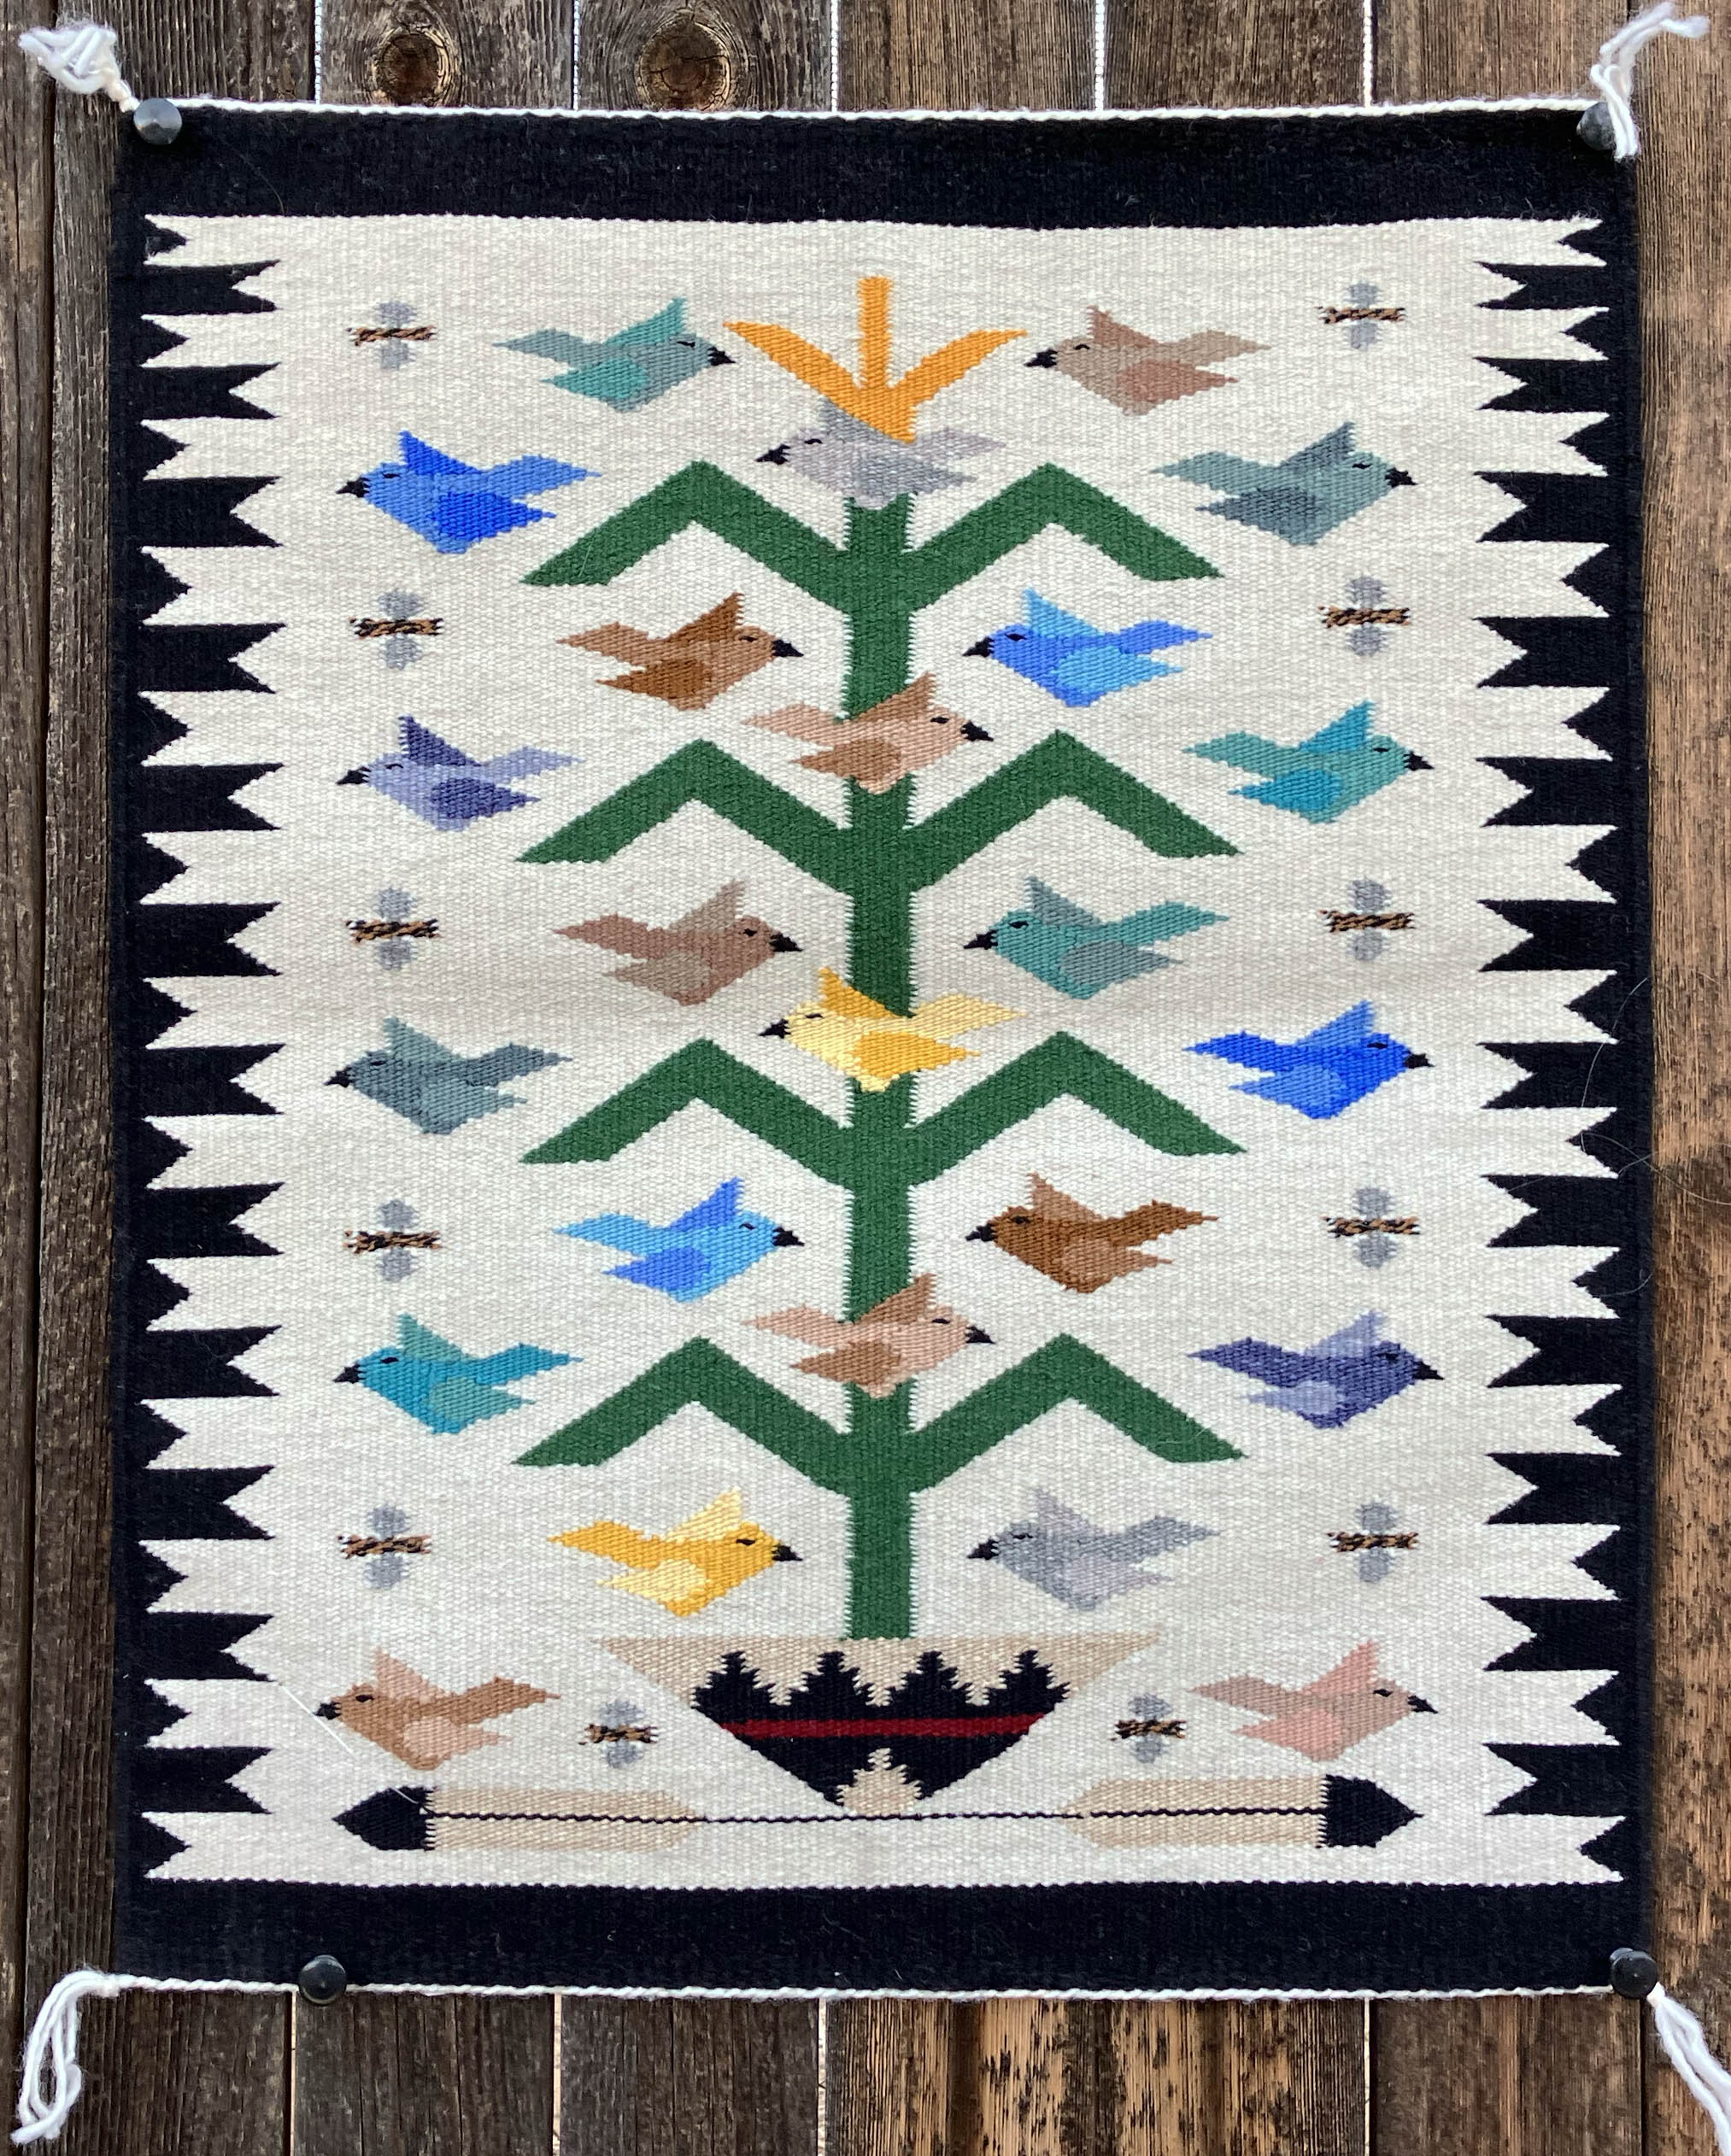 | Navajo Tree of Life Weaving| Penfield Gallery of Indian Arts | Albuquerque, New Mexico